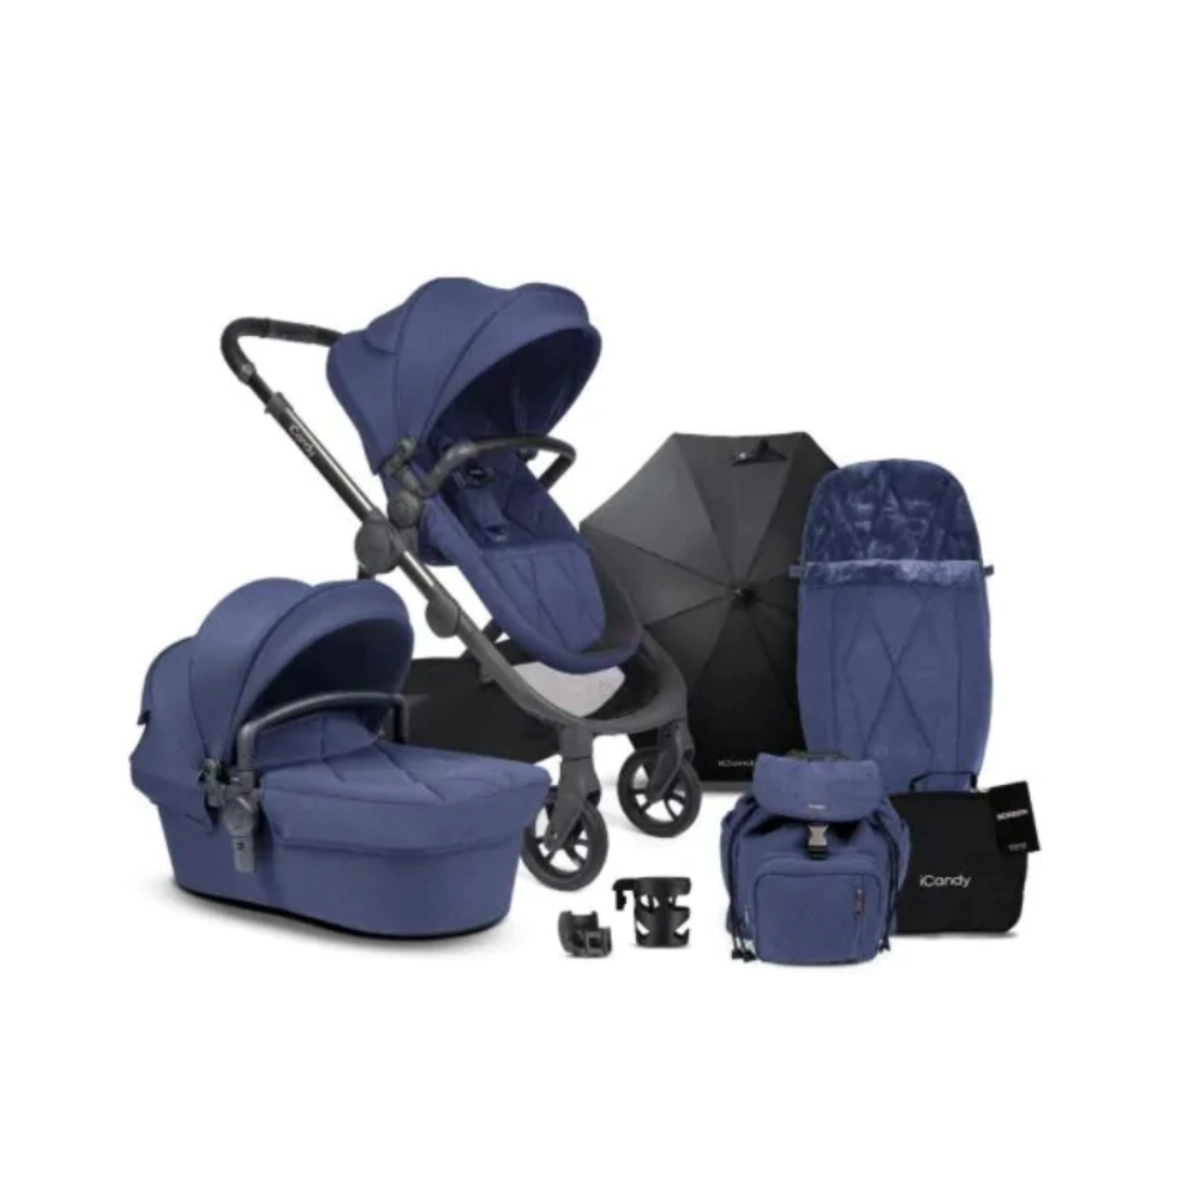 Image of iCandy Orange Pushchair and Carrycot Summer Complete Bundle - Royal Blue Marl